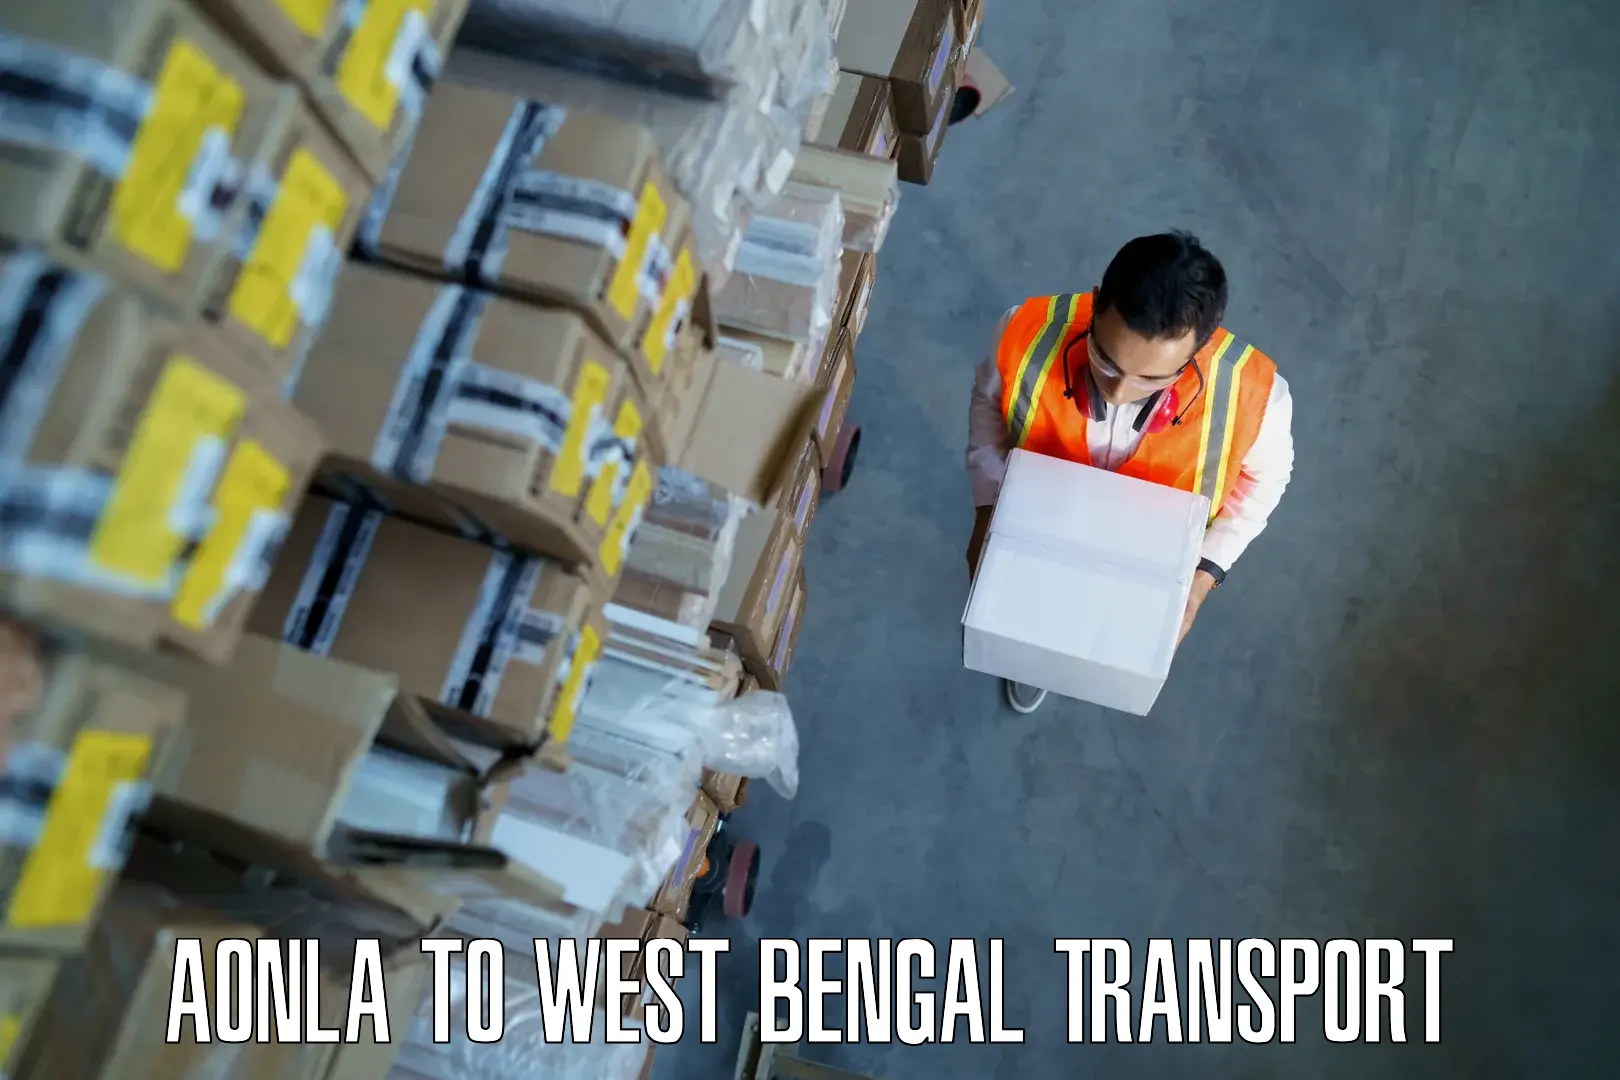 Furniture transport service Aonla to West Bengal